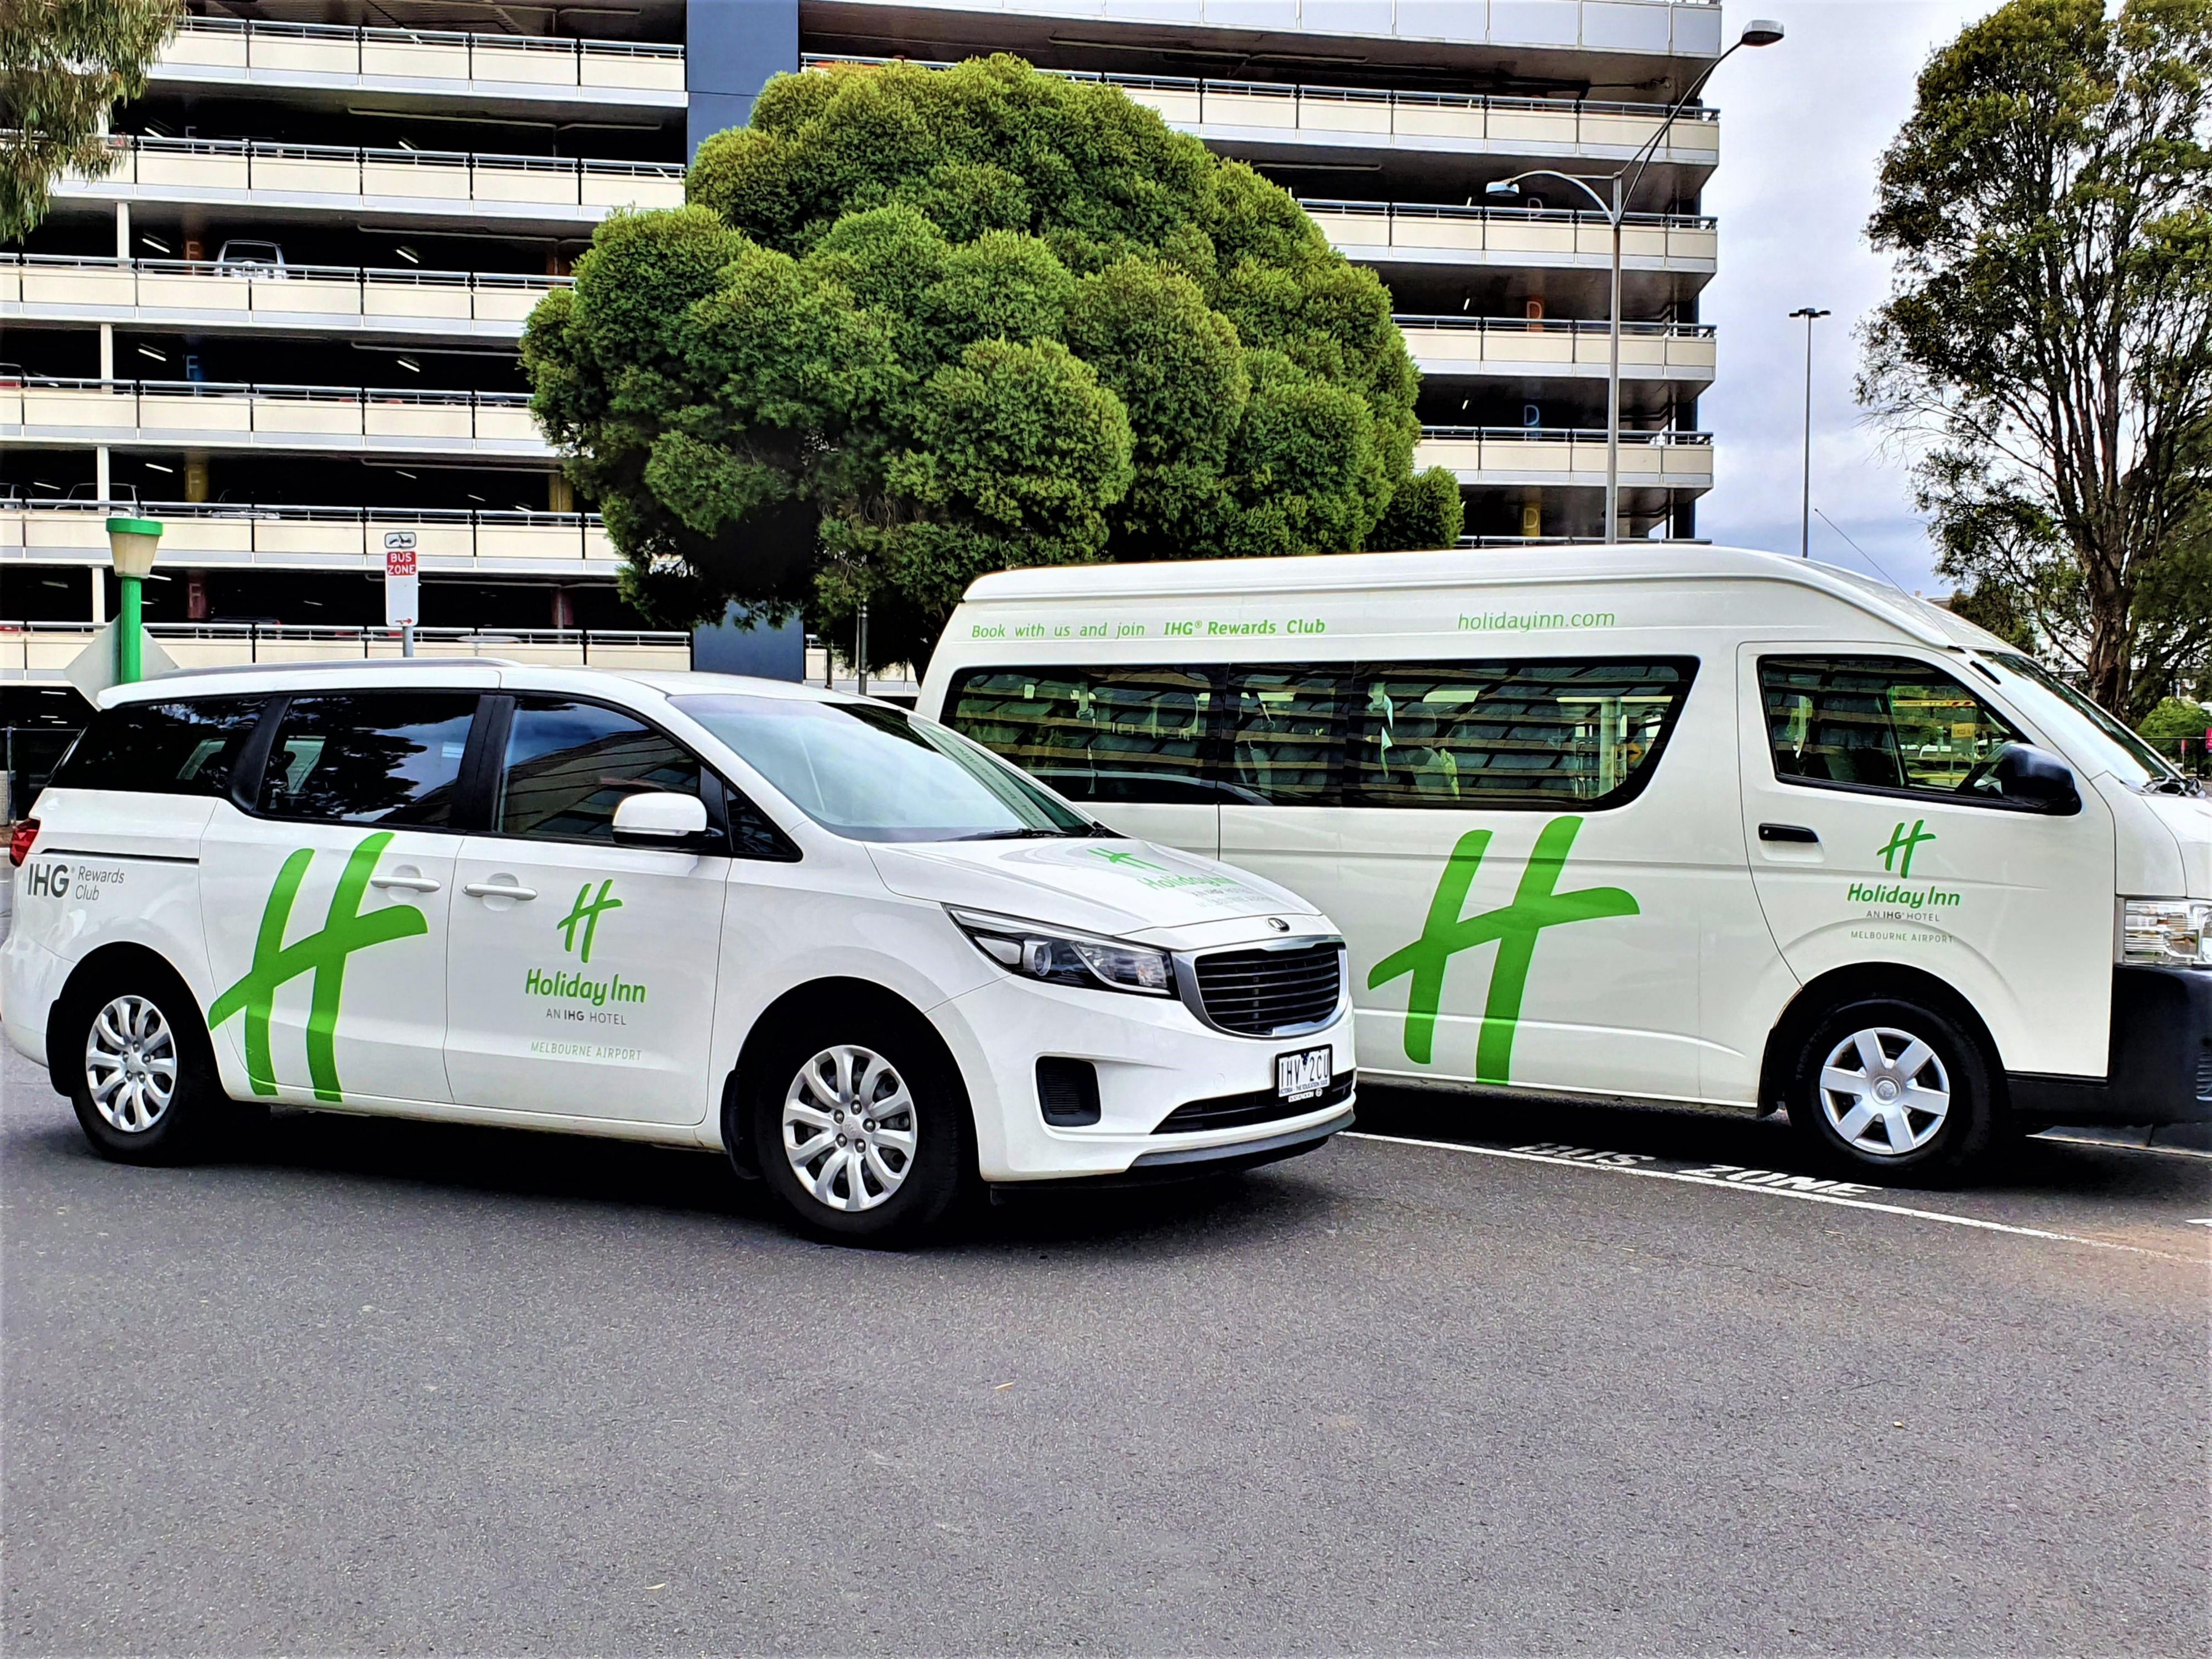 We have shuttle which offers transfers to Melbourne Airport 24 hours a day.